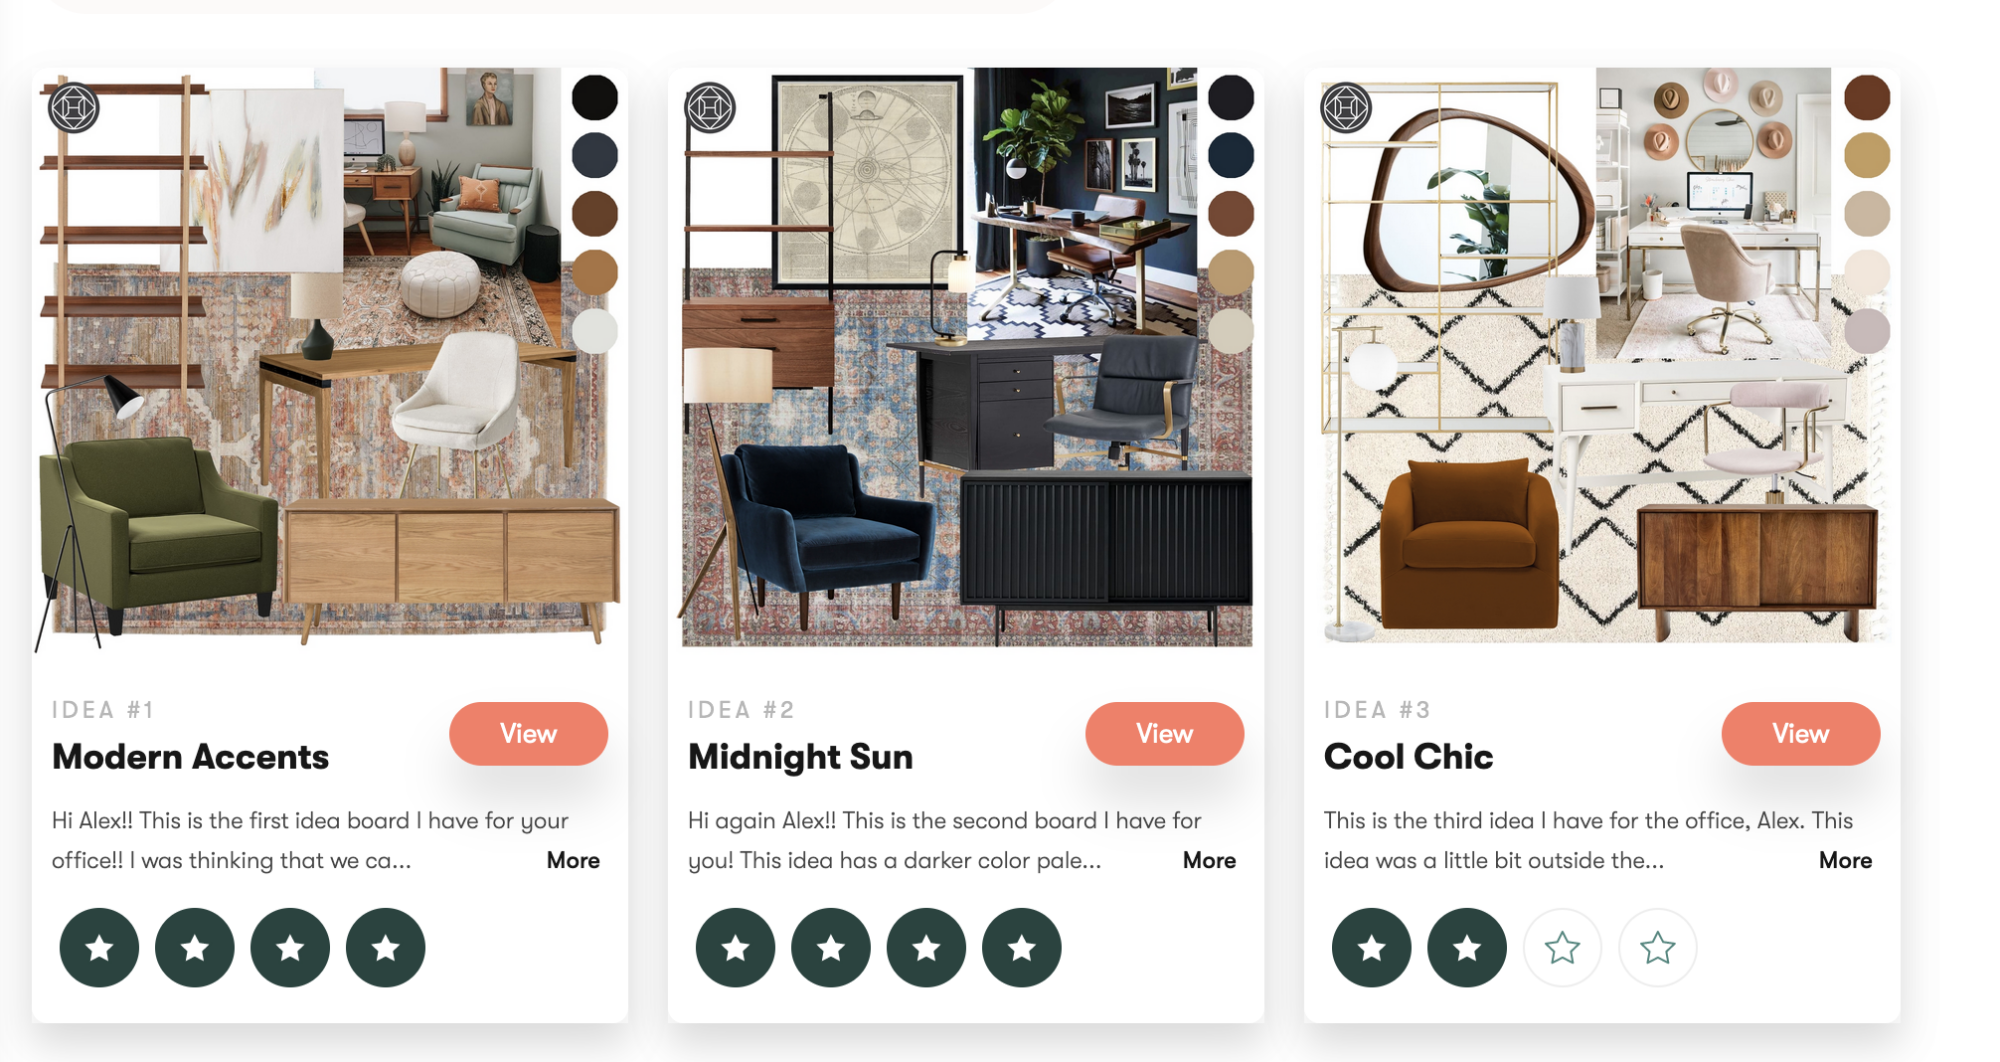 Three slightly different collages of furniture and color palettes